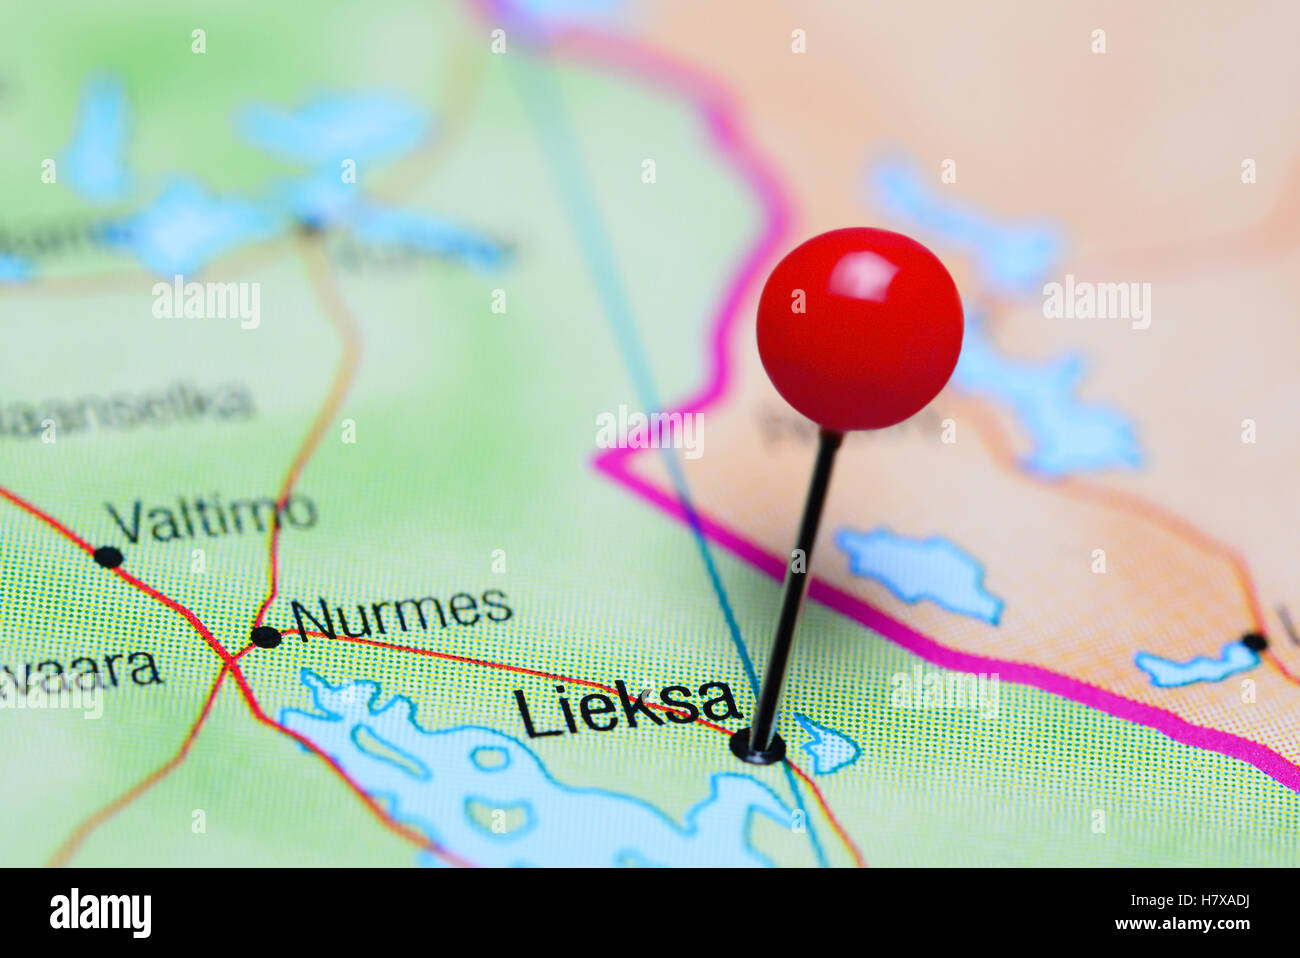 Lieksa pinned on a map of Finland Stock Photo